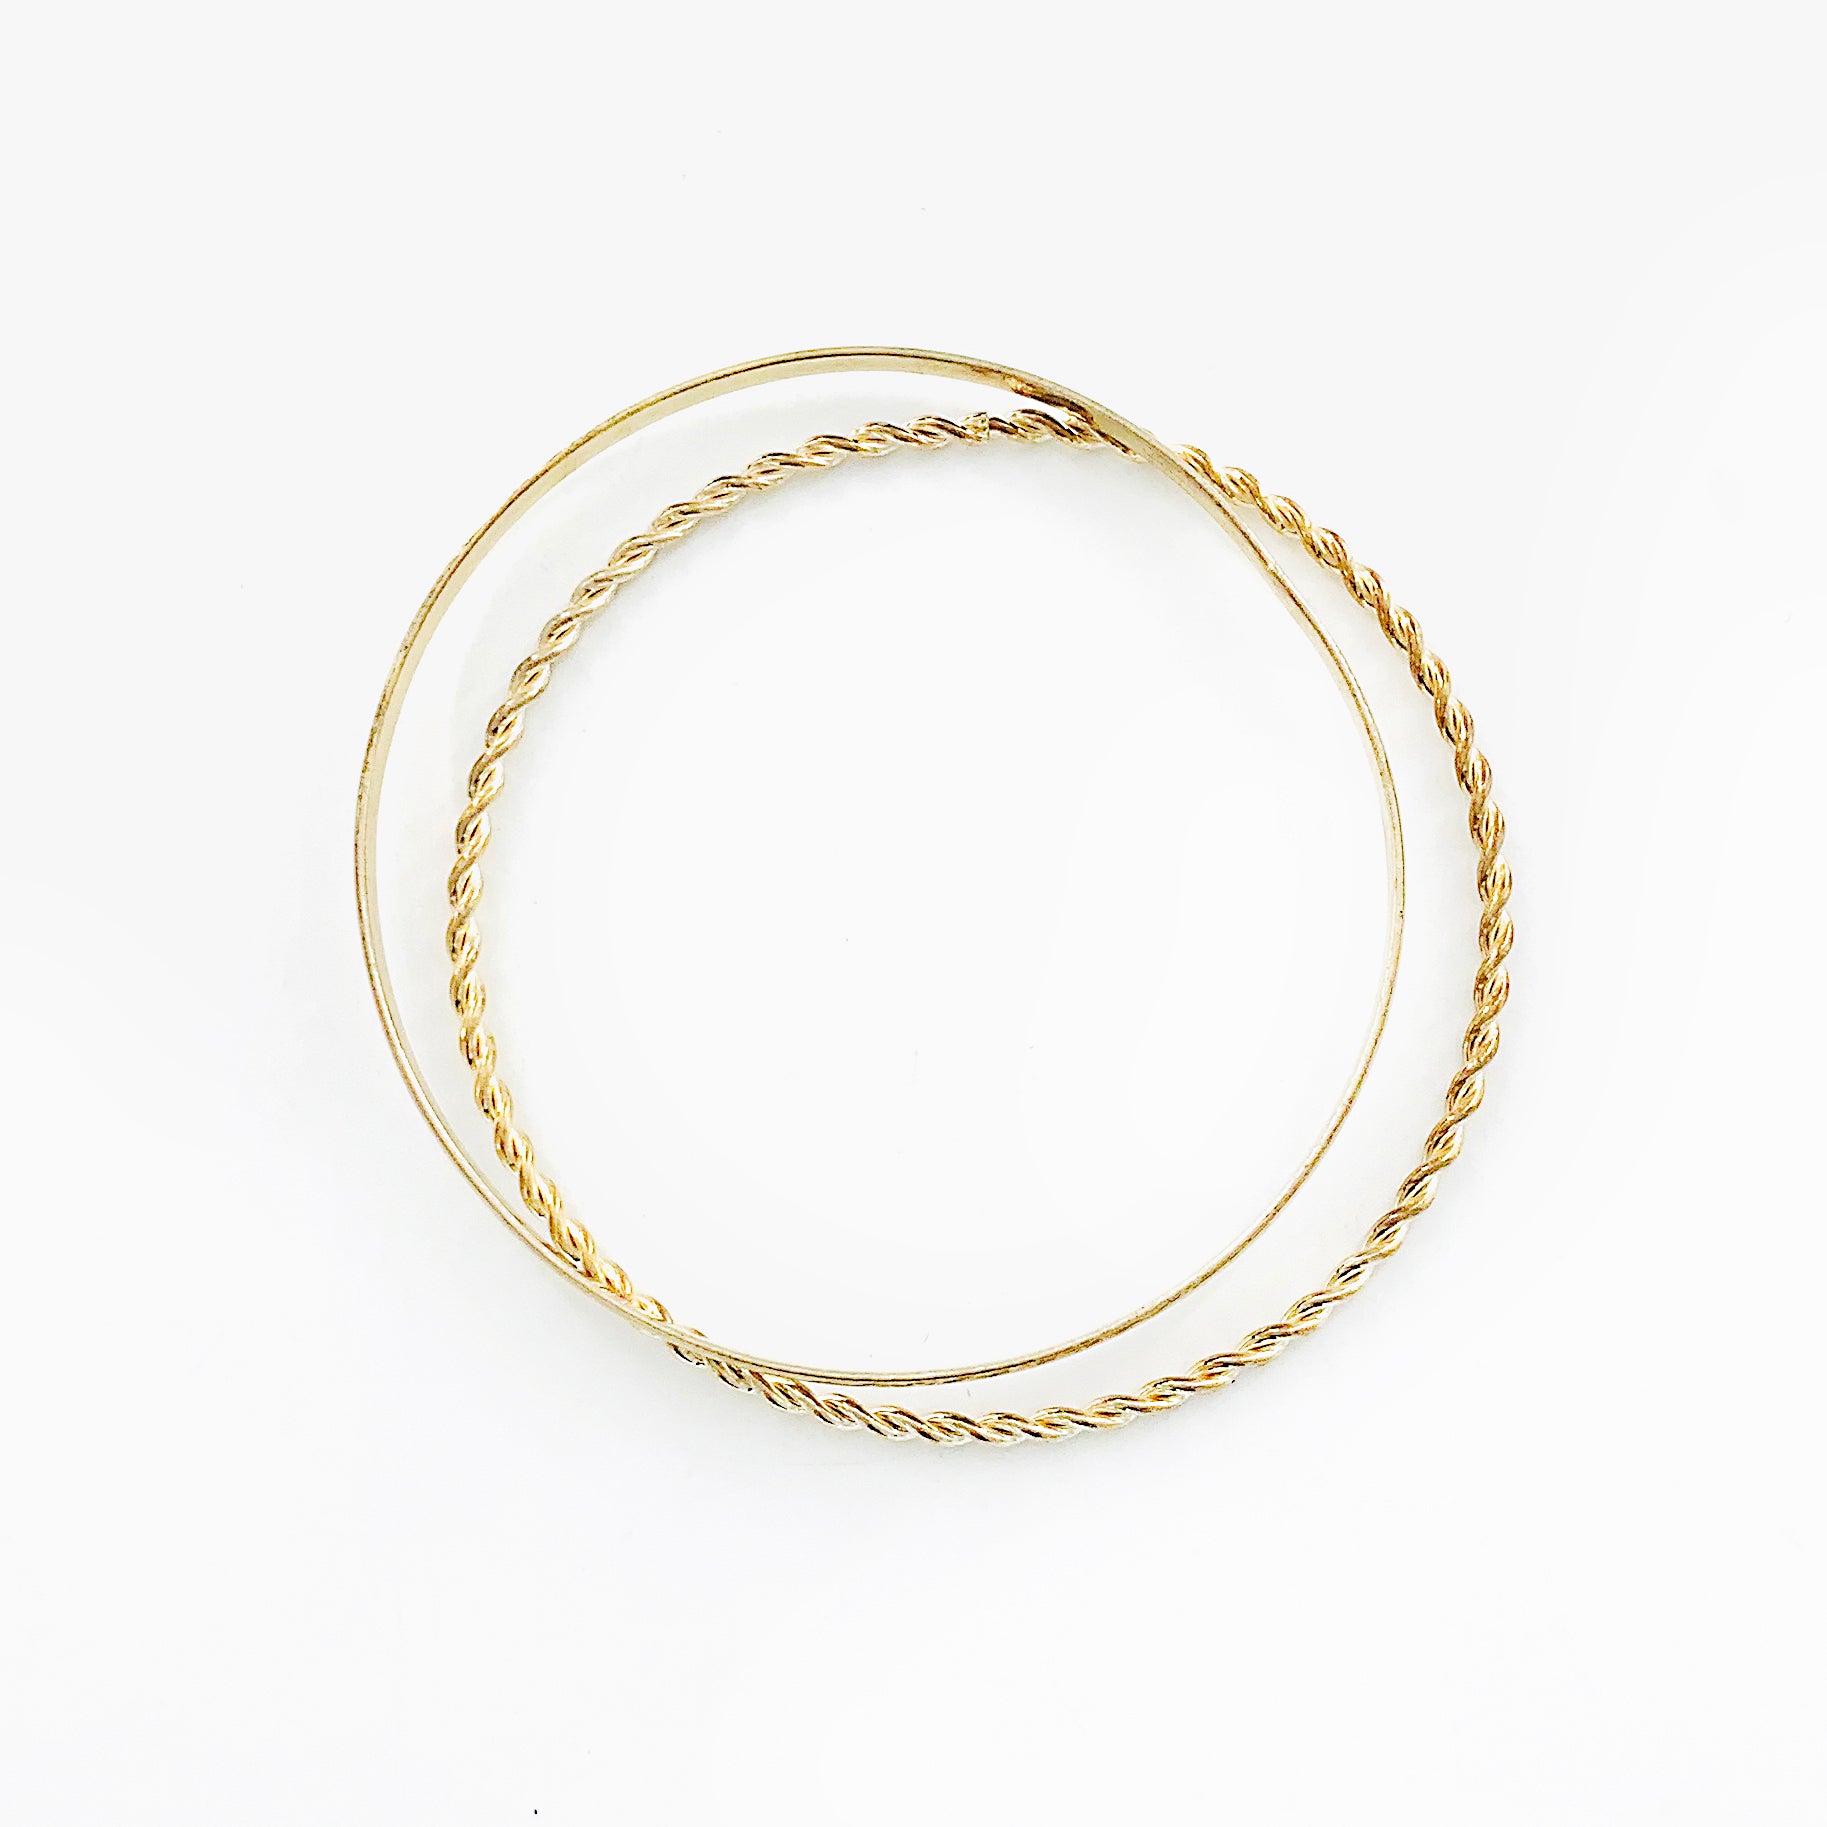 Thin gold bangles with twisted design